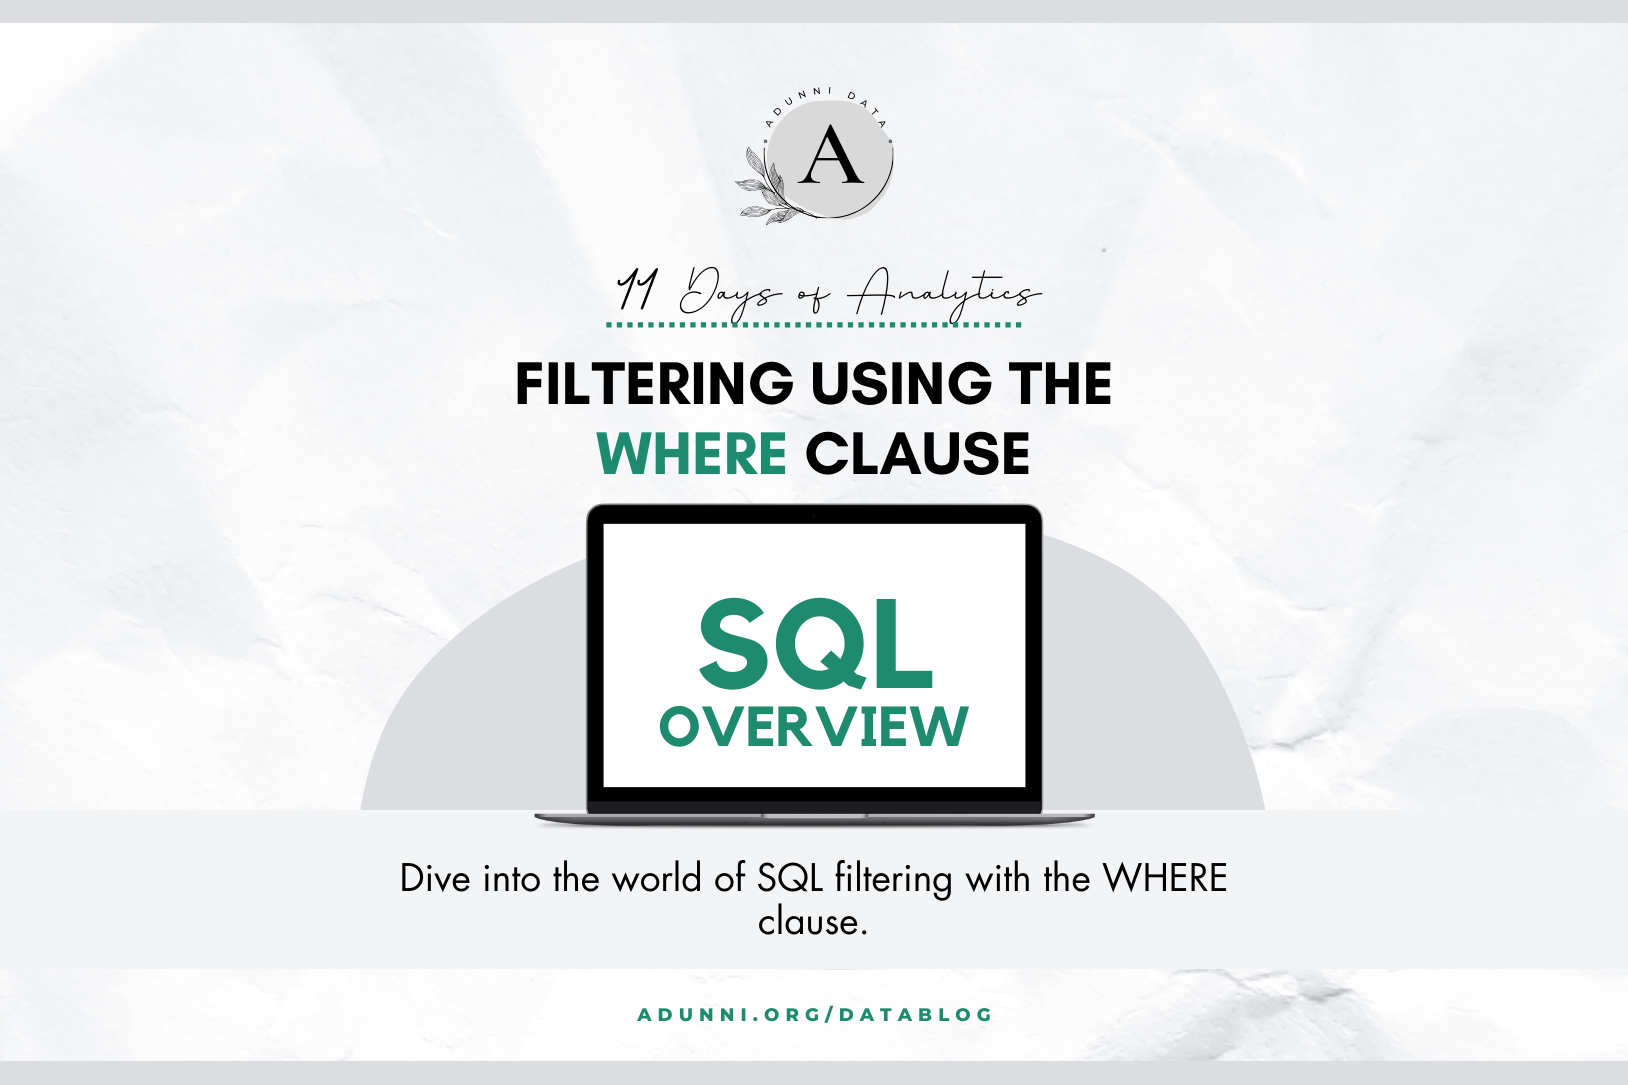 Filtering using the WHERE clause